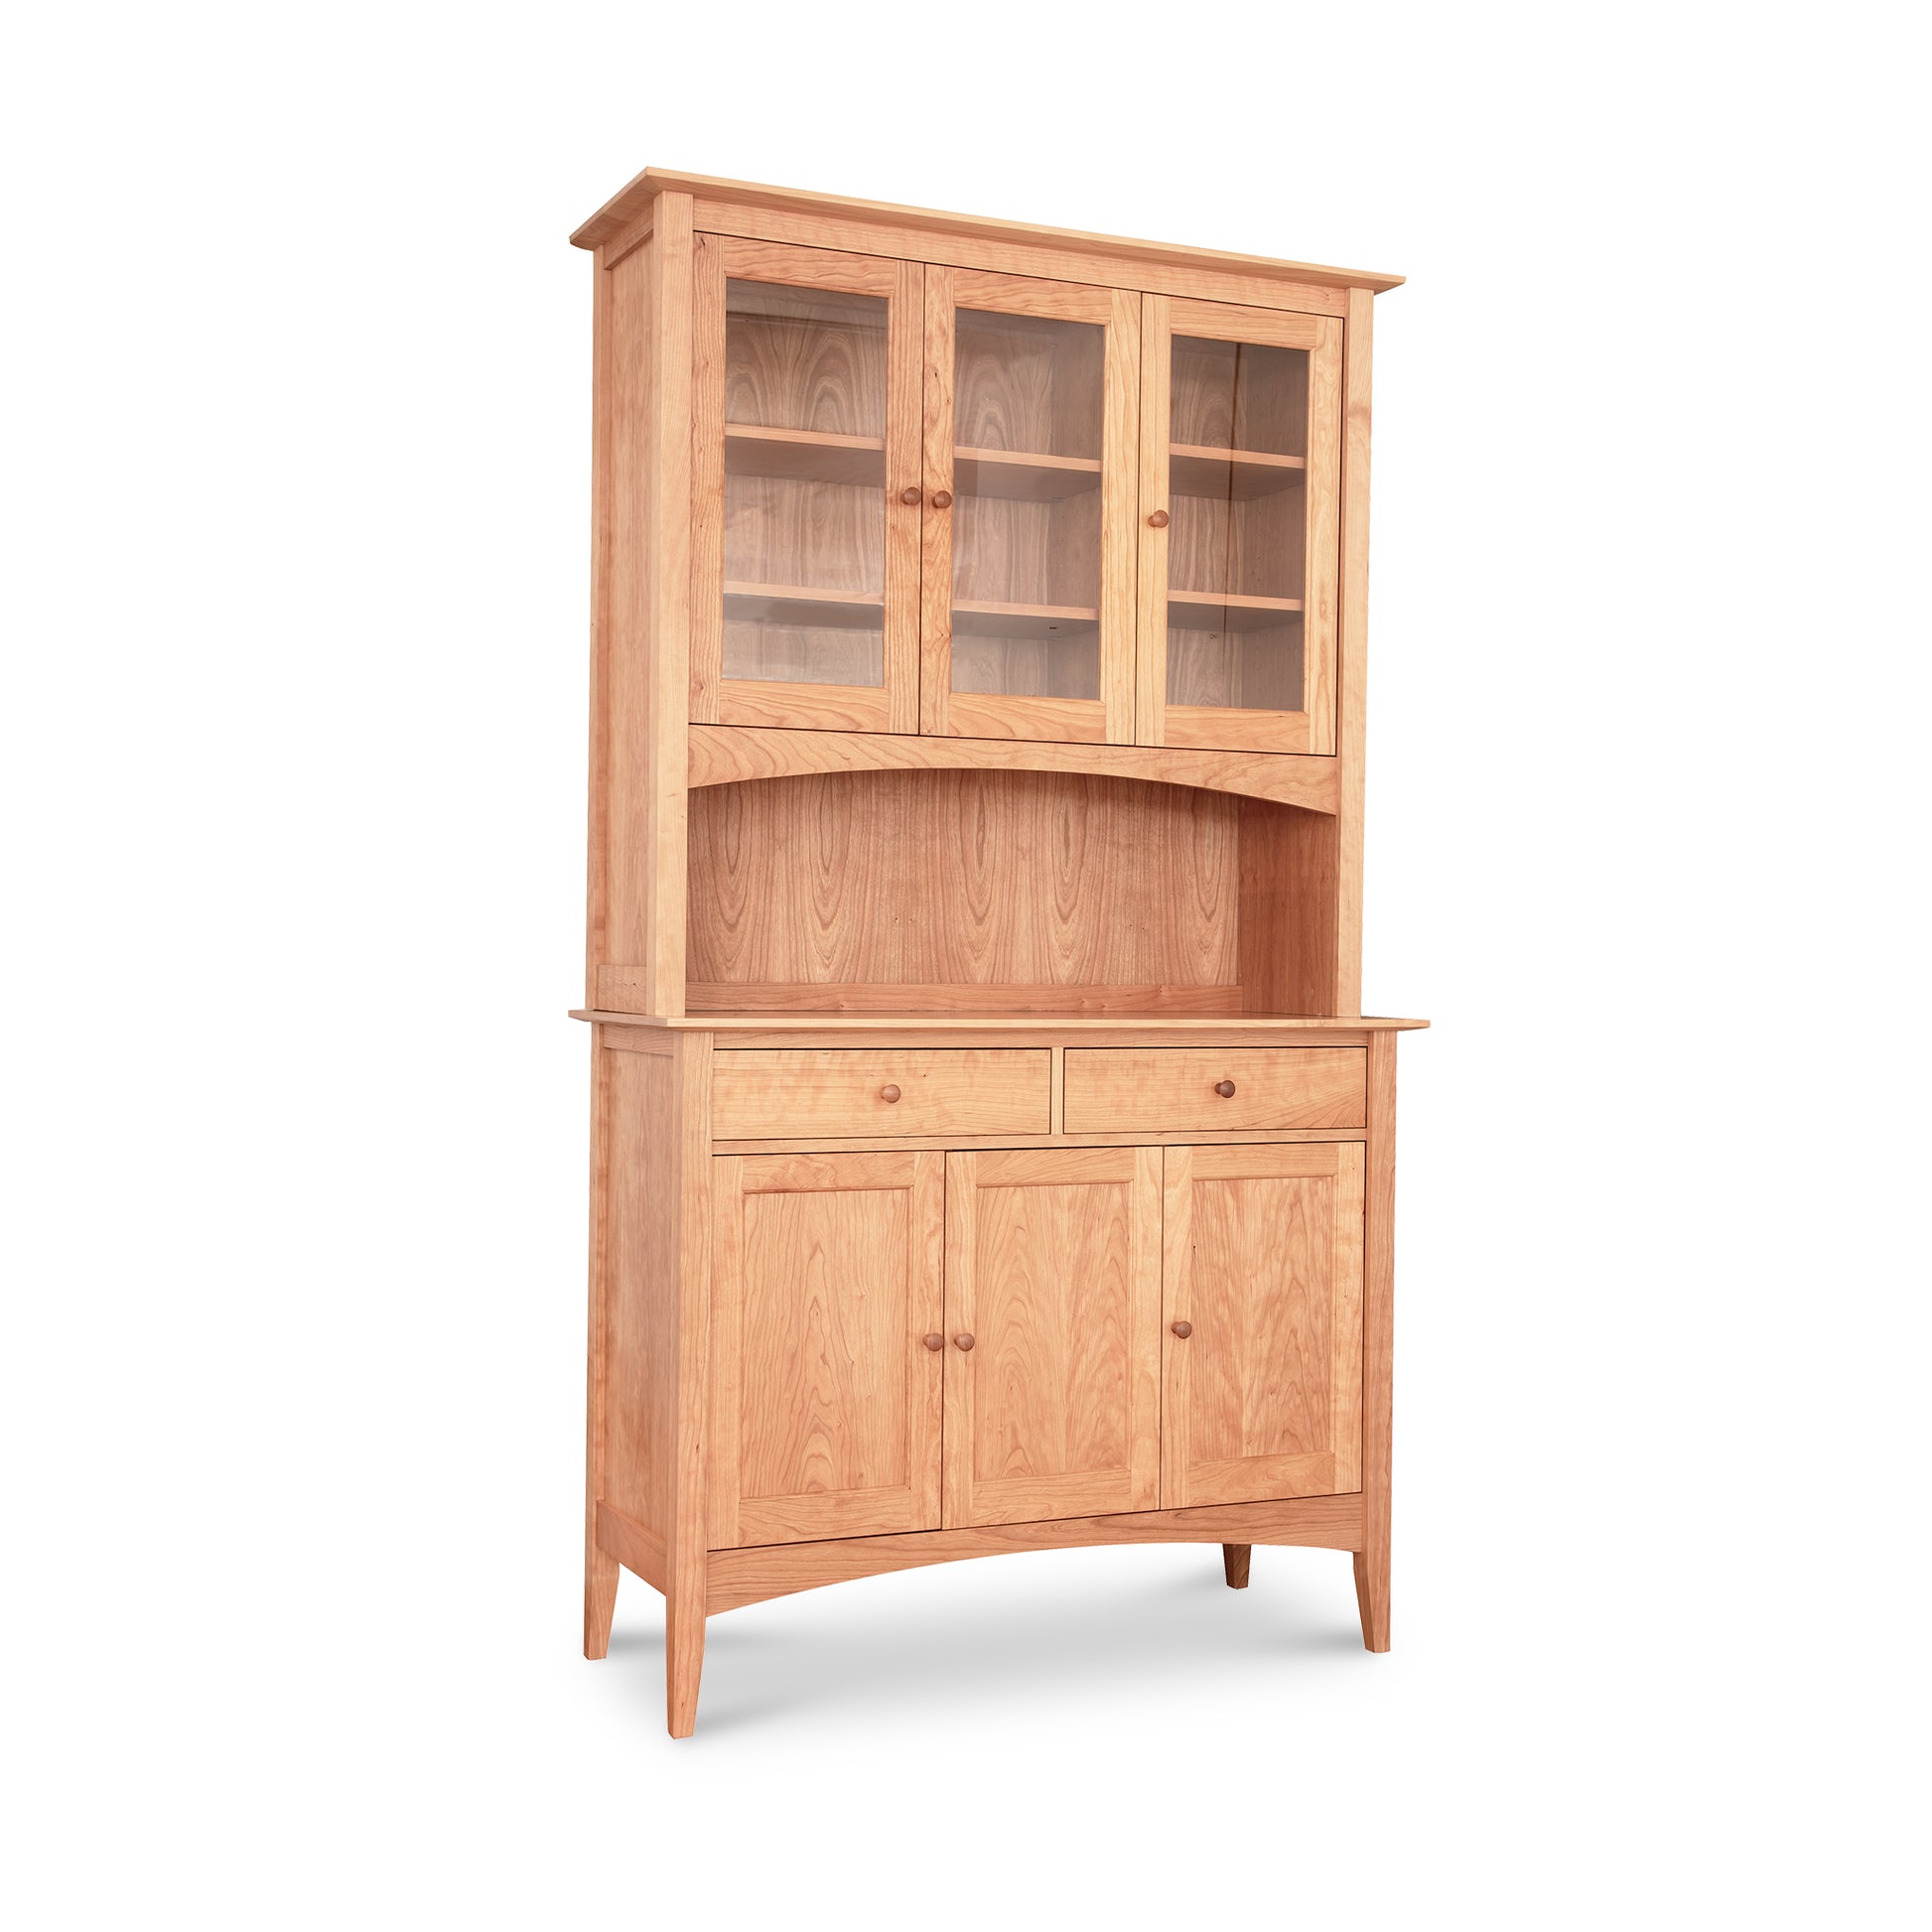 Maple Corner Woodworks American Shaker 50" China Cabinet with adjustable shelves, featuring upper glass-fronted cabinets and lower wooden doors against a white background.